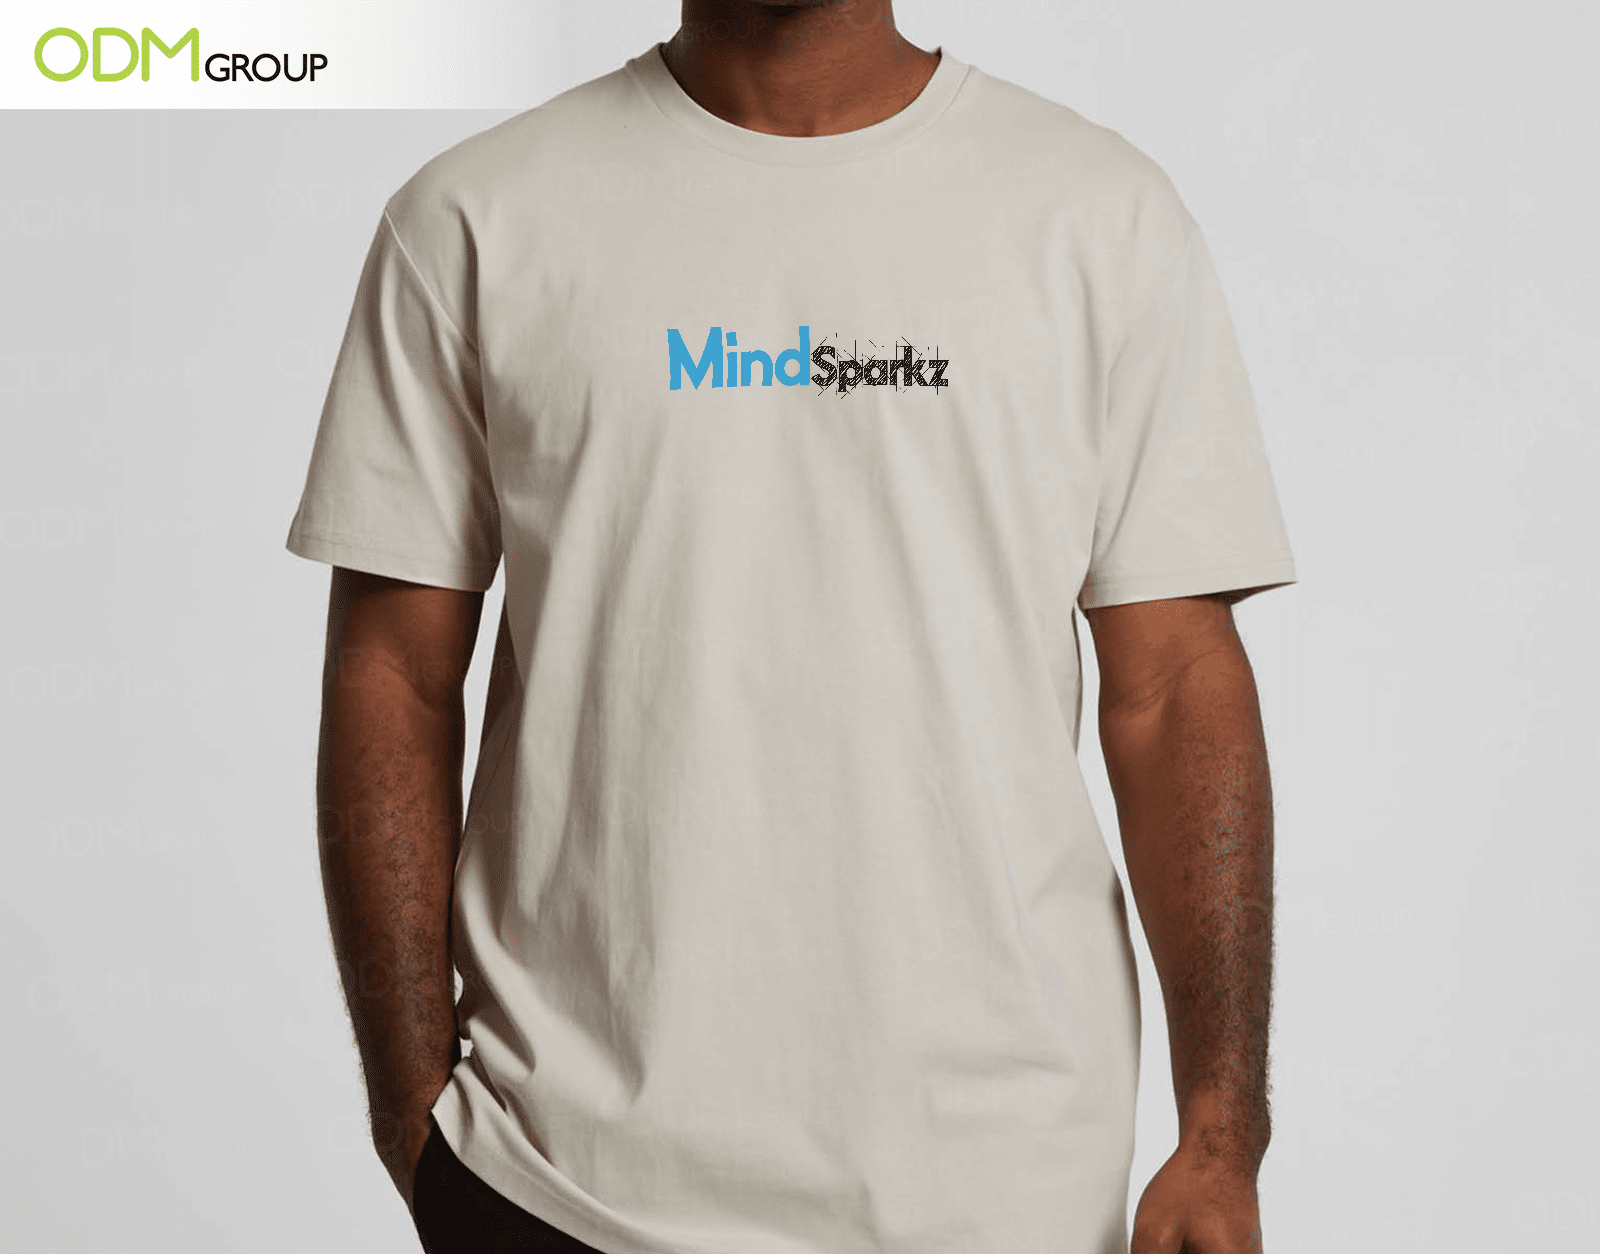 Person wearing a custom t-shirt with MindSparkz logo by ODM Group.